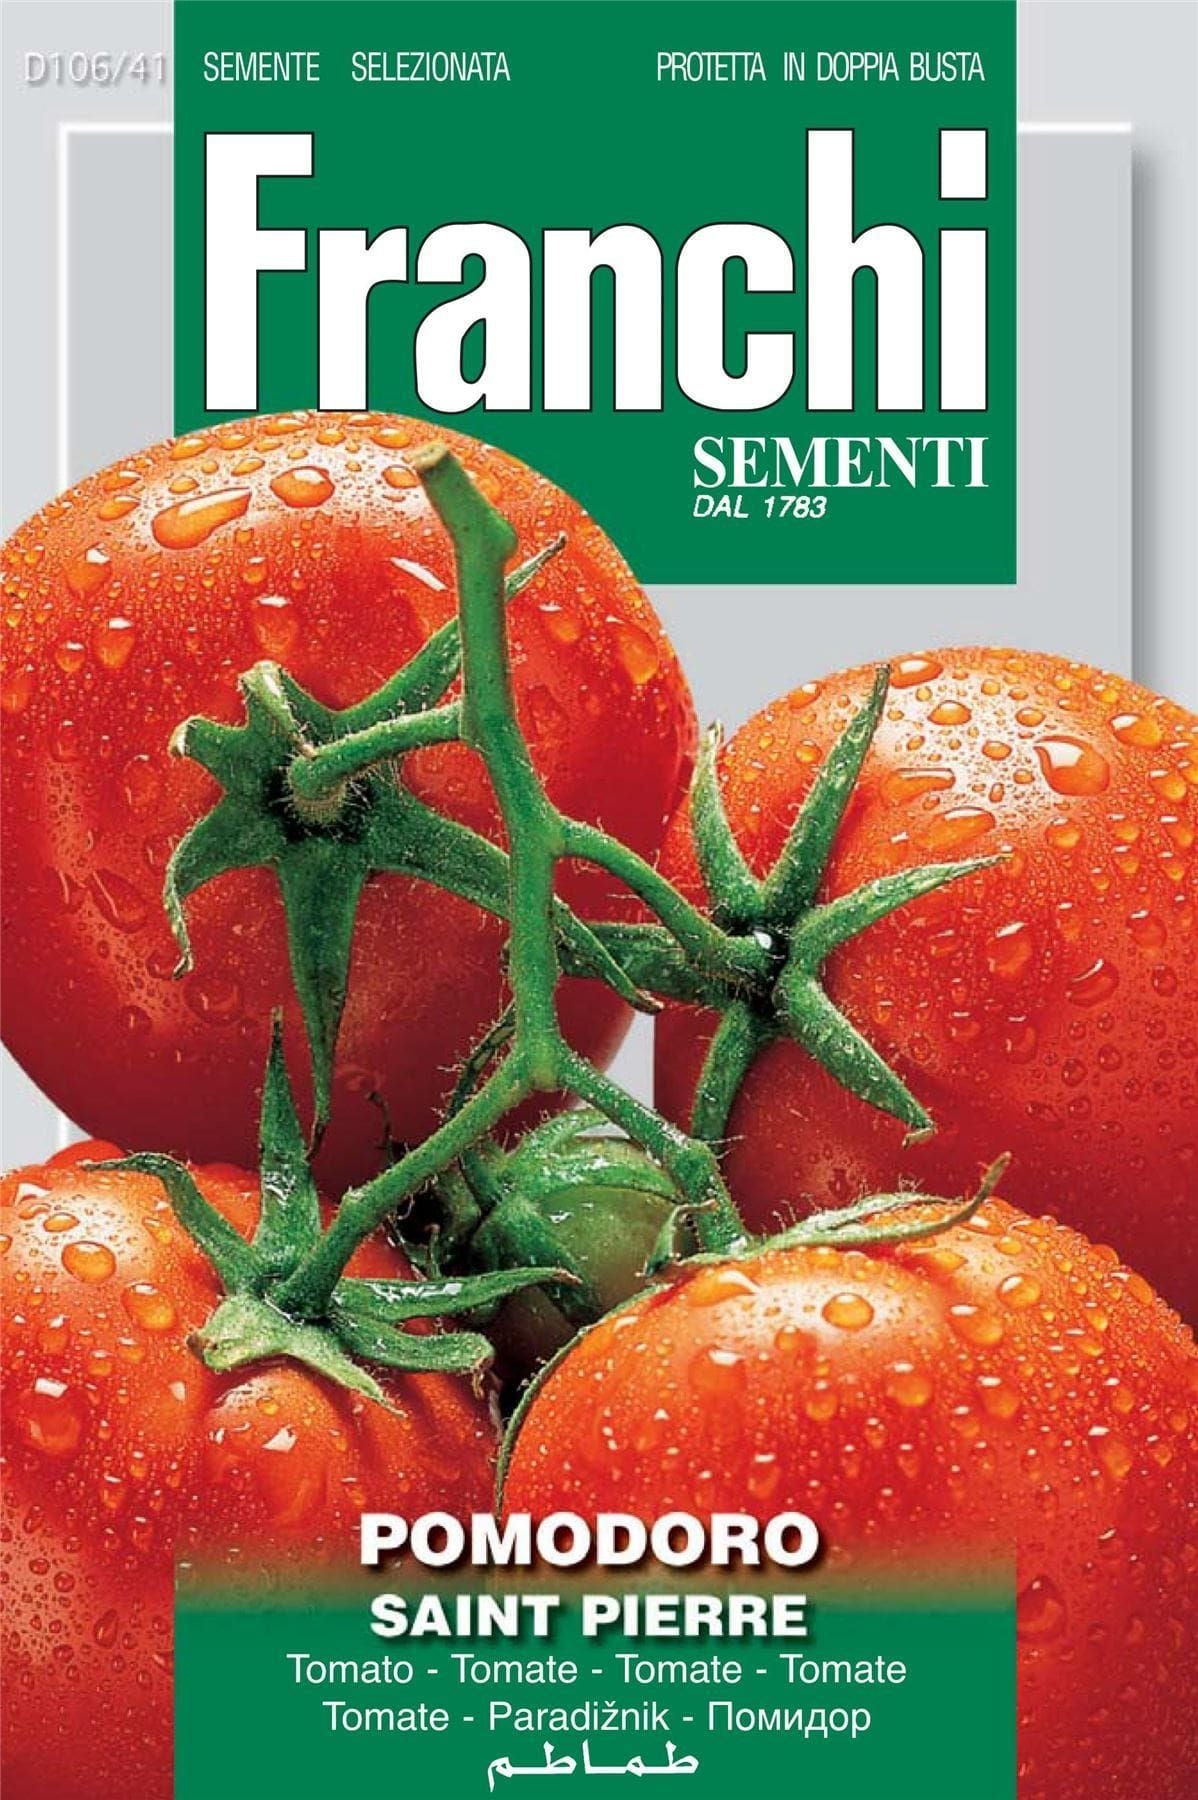 Franchi Seeds of Italy Tomato Saint Pierre Seeds